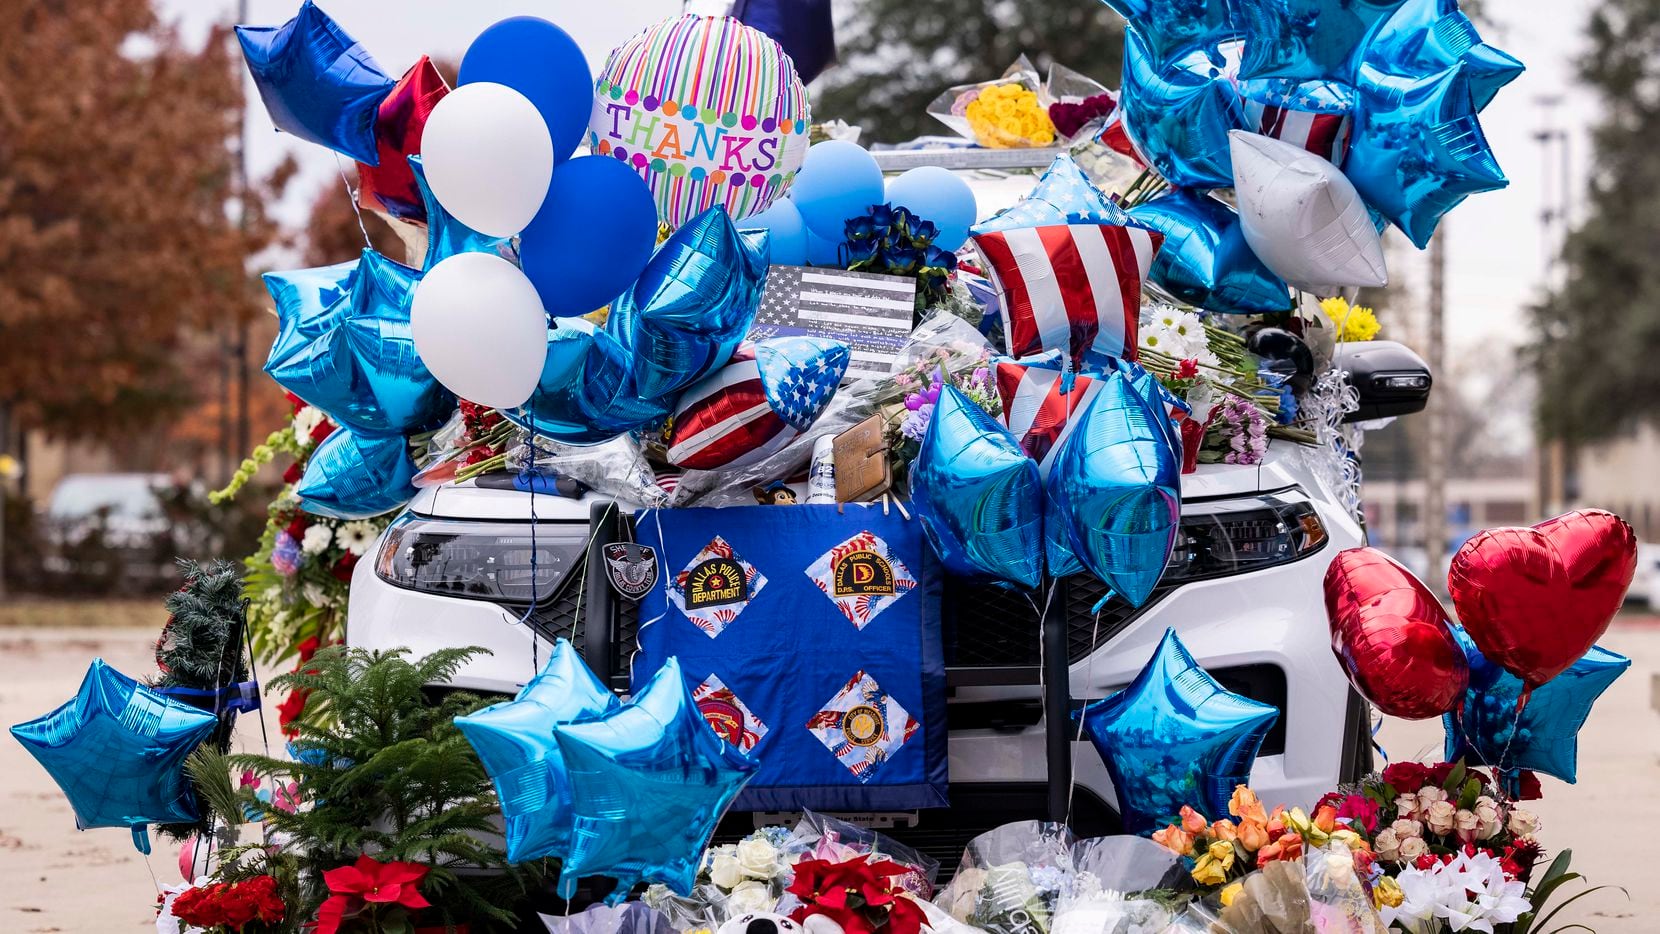 Tributes cover a patrol car as a memorial for Mesquite police Officer Richard Lee Houston II at the Mesquite Police Department on Saturday, Dec. 4, 2021, in Mesquite, Texas. Houston, a 21-year-veteran of the department, was shot and killed outside a grocery store a day earlier after responding to a disturbance call. (Juan Figueroa/The Dallas Morning News)